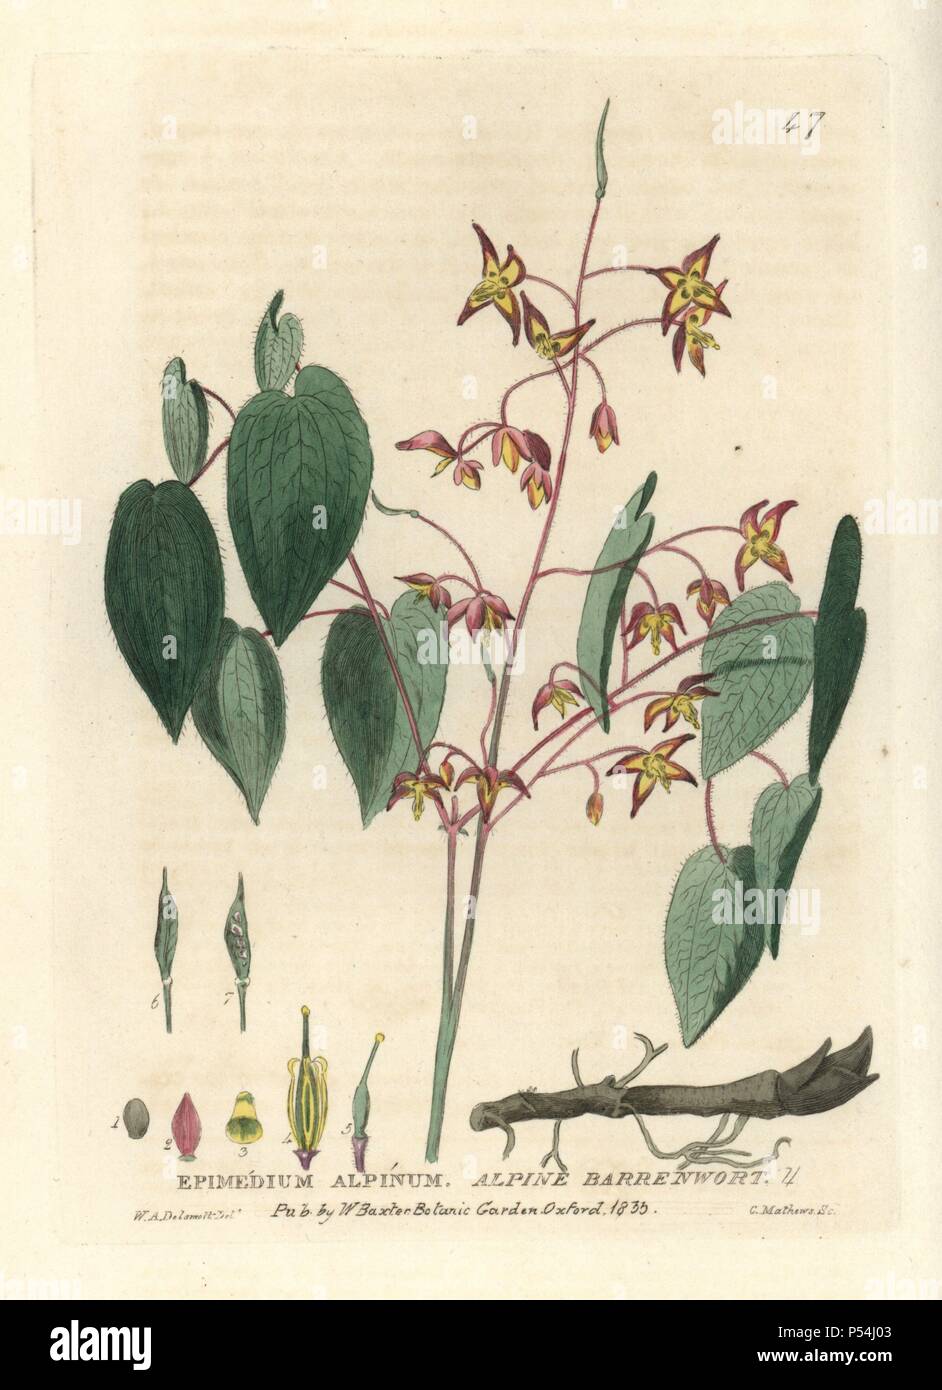 Alpine barrenwort, Epimedium alpinum. Handcoloured copperplate engraving from a drawing by W.A. Delamott from William Baxter's "British Phaenogamous Botany" 1834. Scotsman William Baxter (1788-1871) was the curator of the Oxford Botanic Garden from 1813 to 1854. Stock Photo